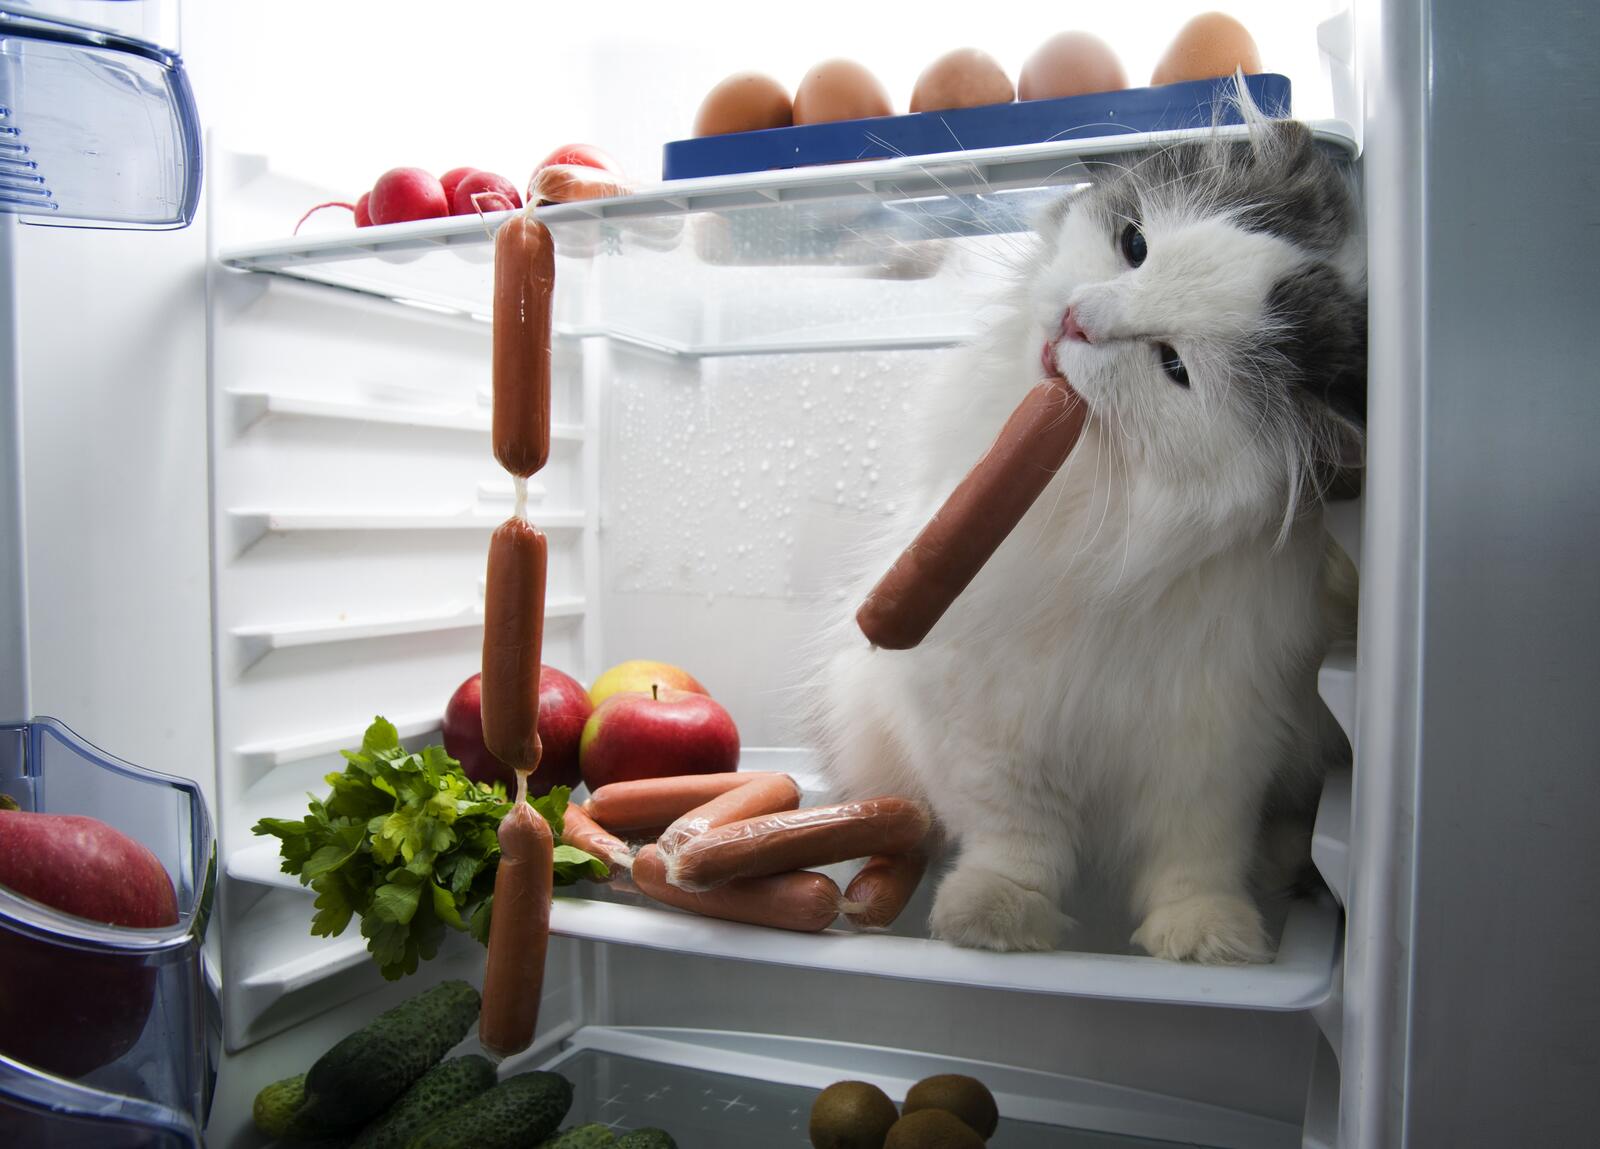 Free photo The cat sits in the fridge and eats a sausage